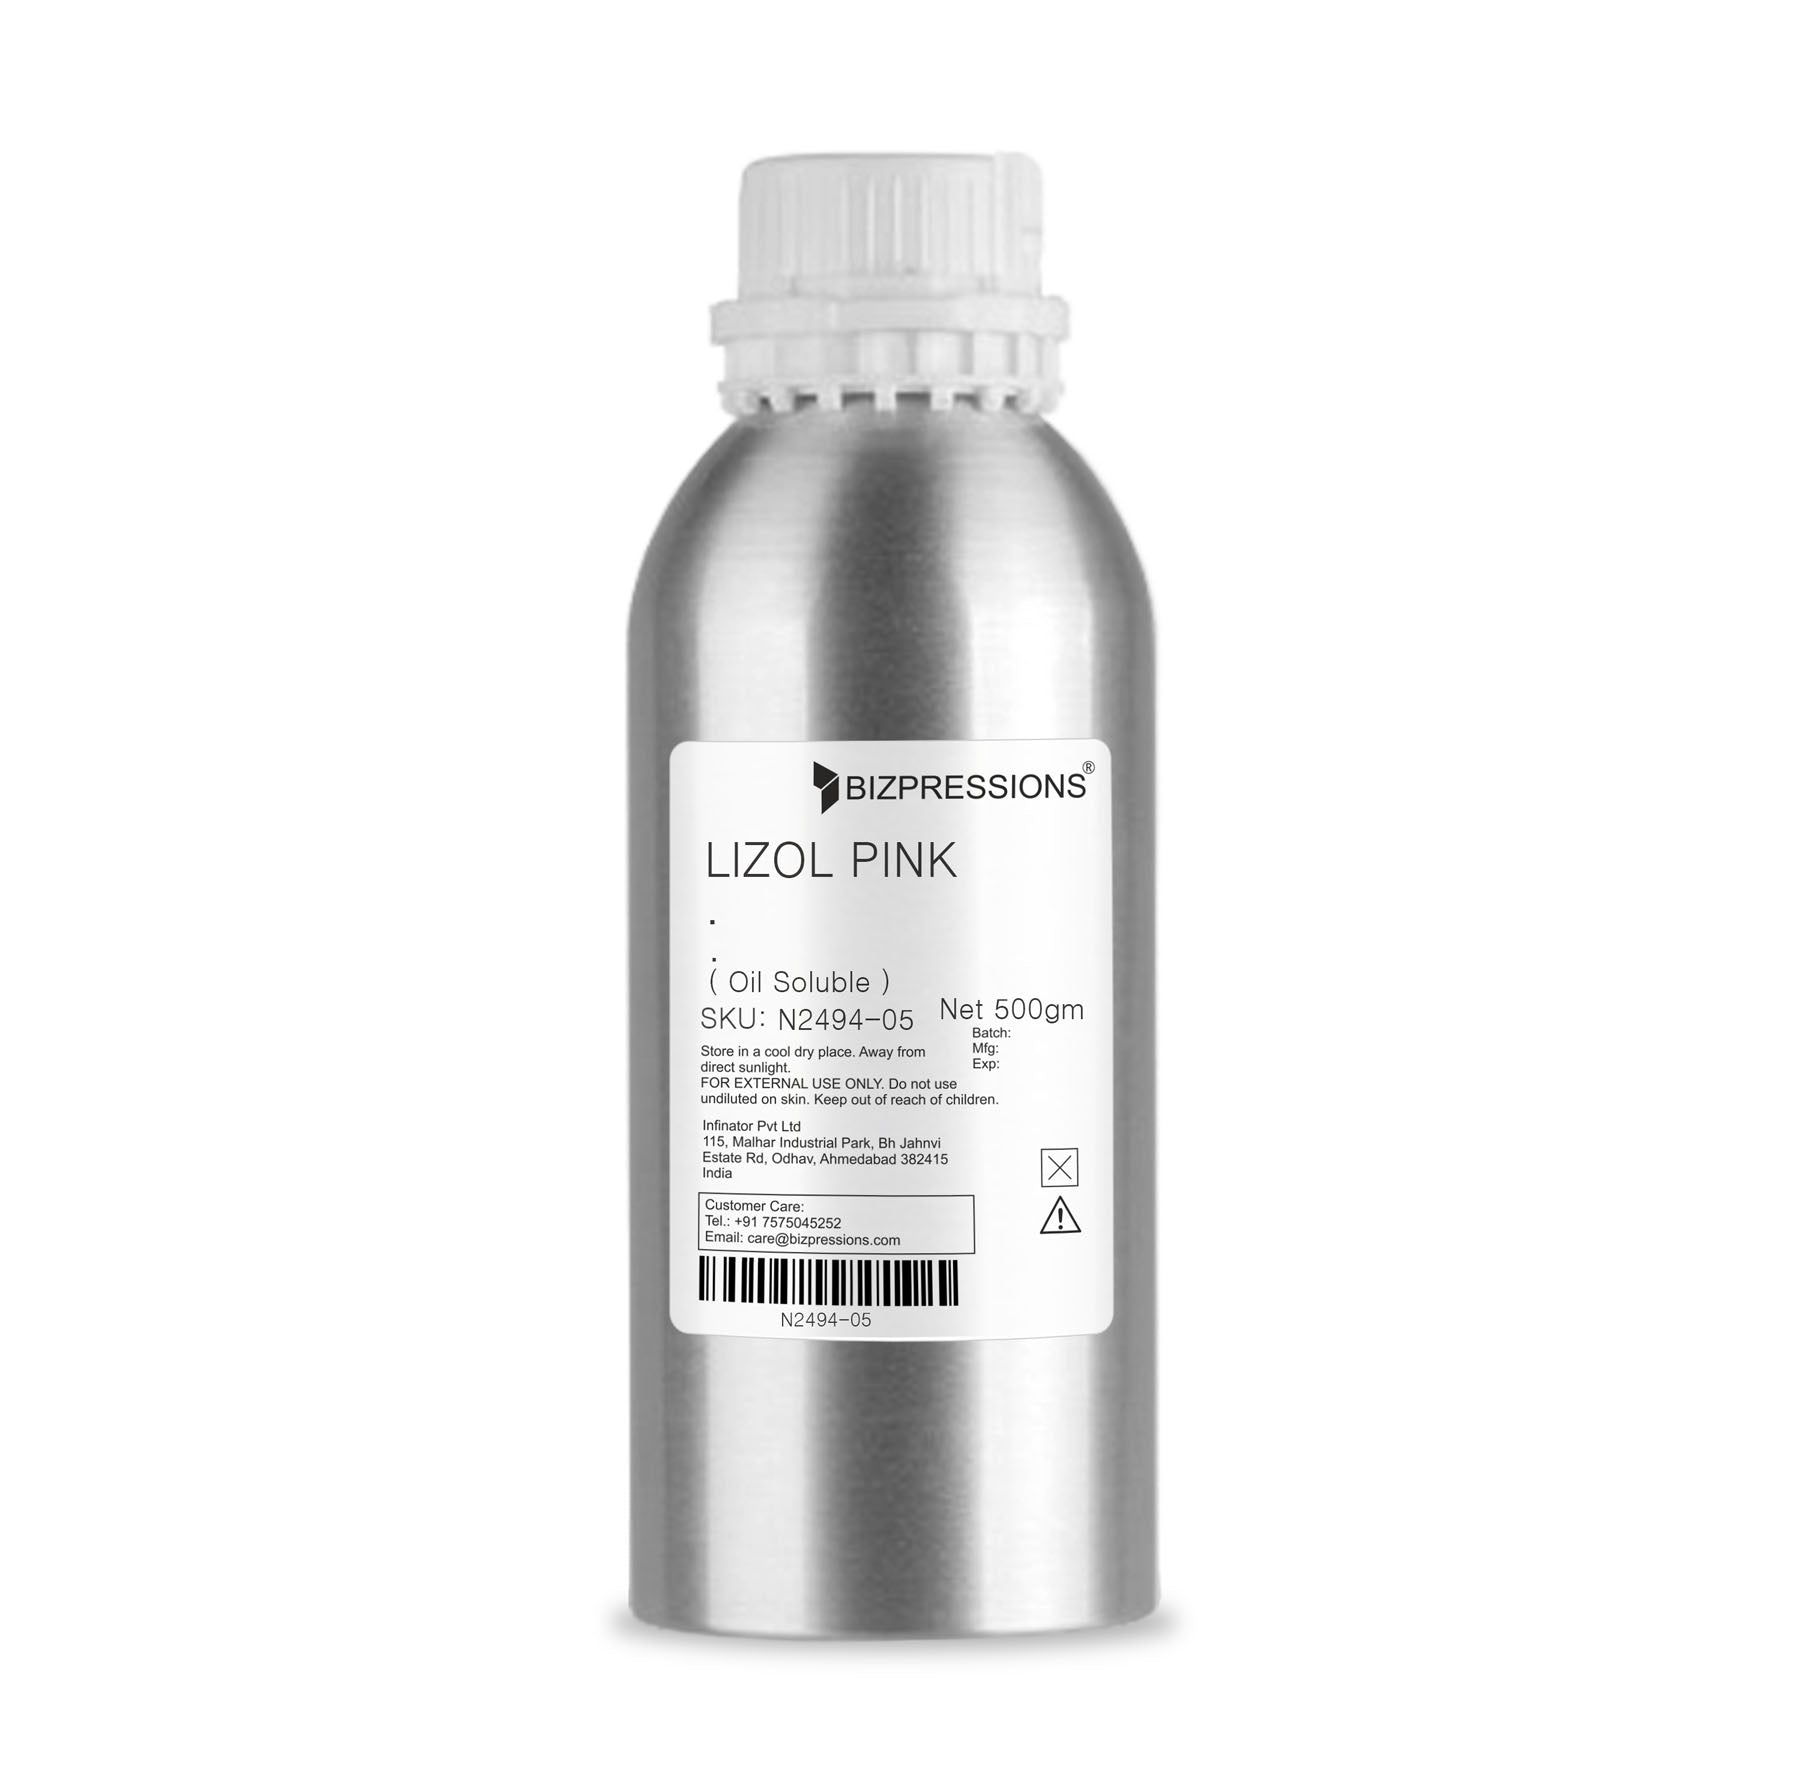 LIZOL PINK - Fragrance ( Oil Soluble ) - 500 gm